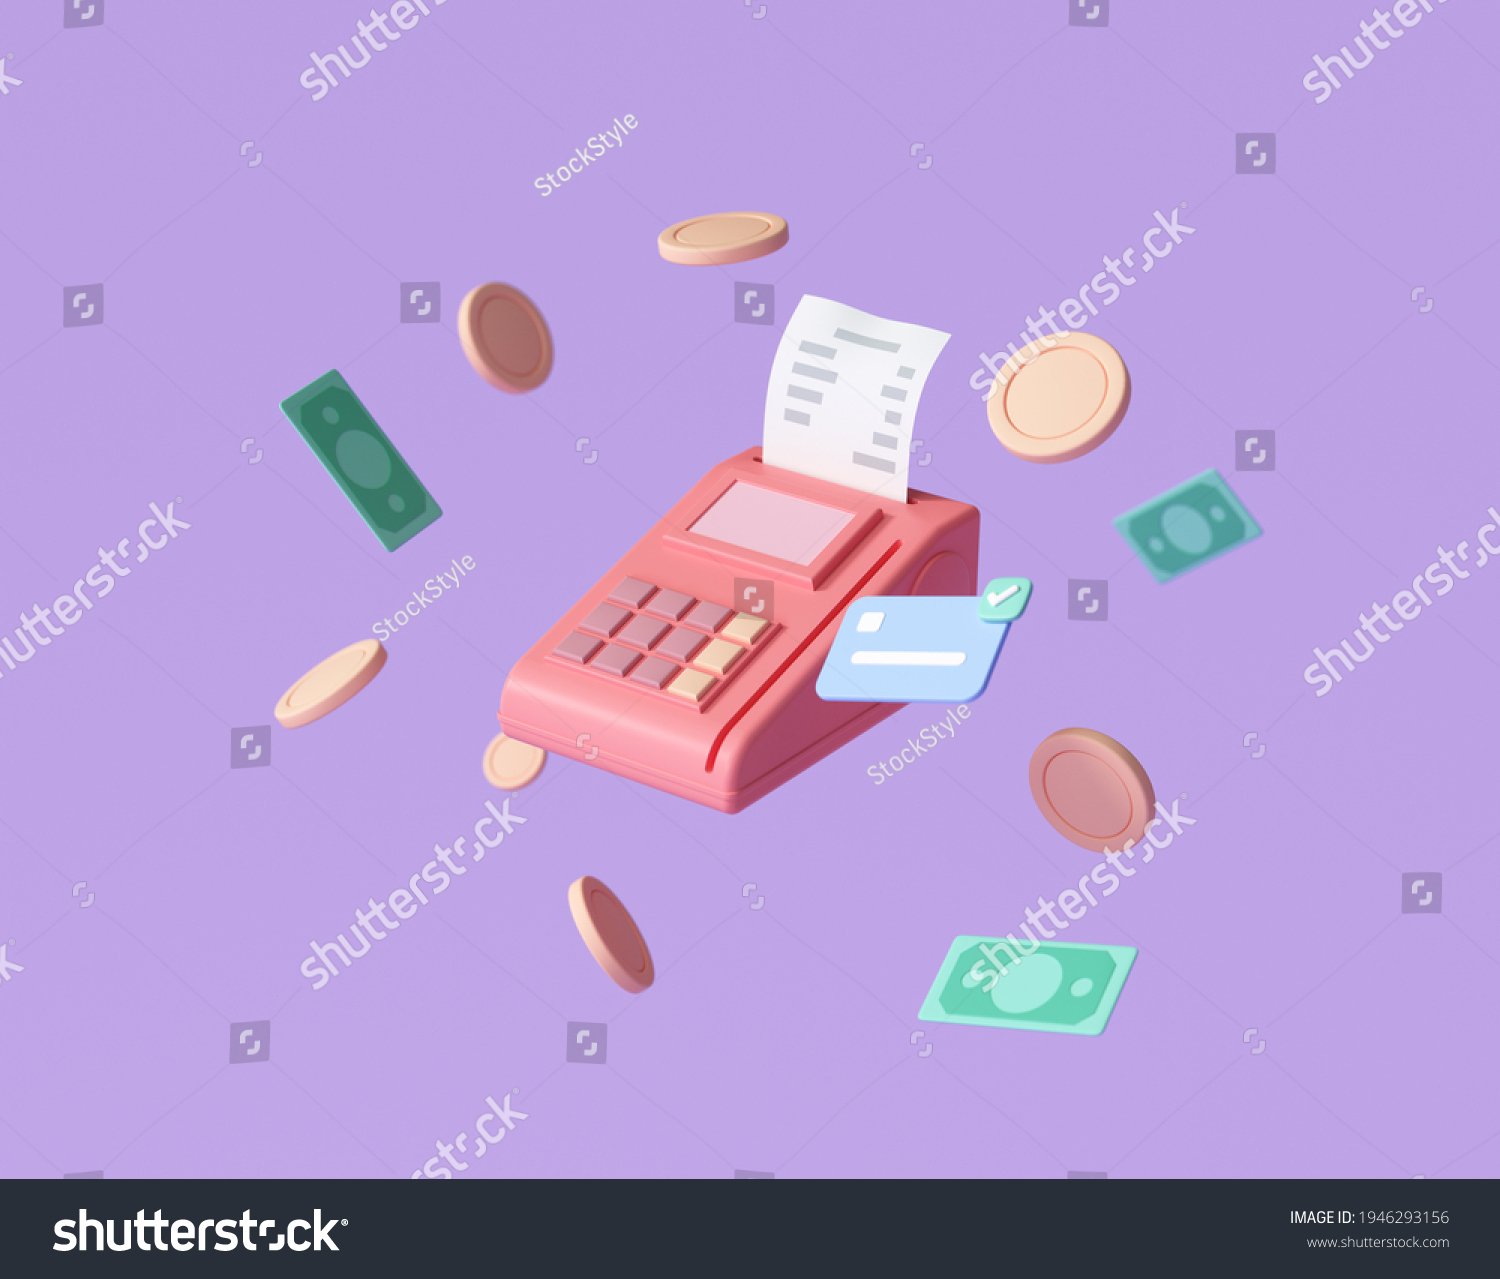 payment-concept-credit-card-payment-terminal-stock-illustration-1946293156